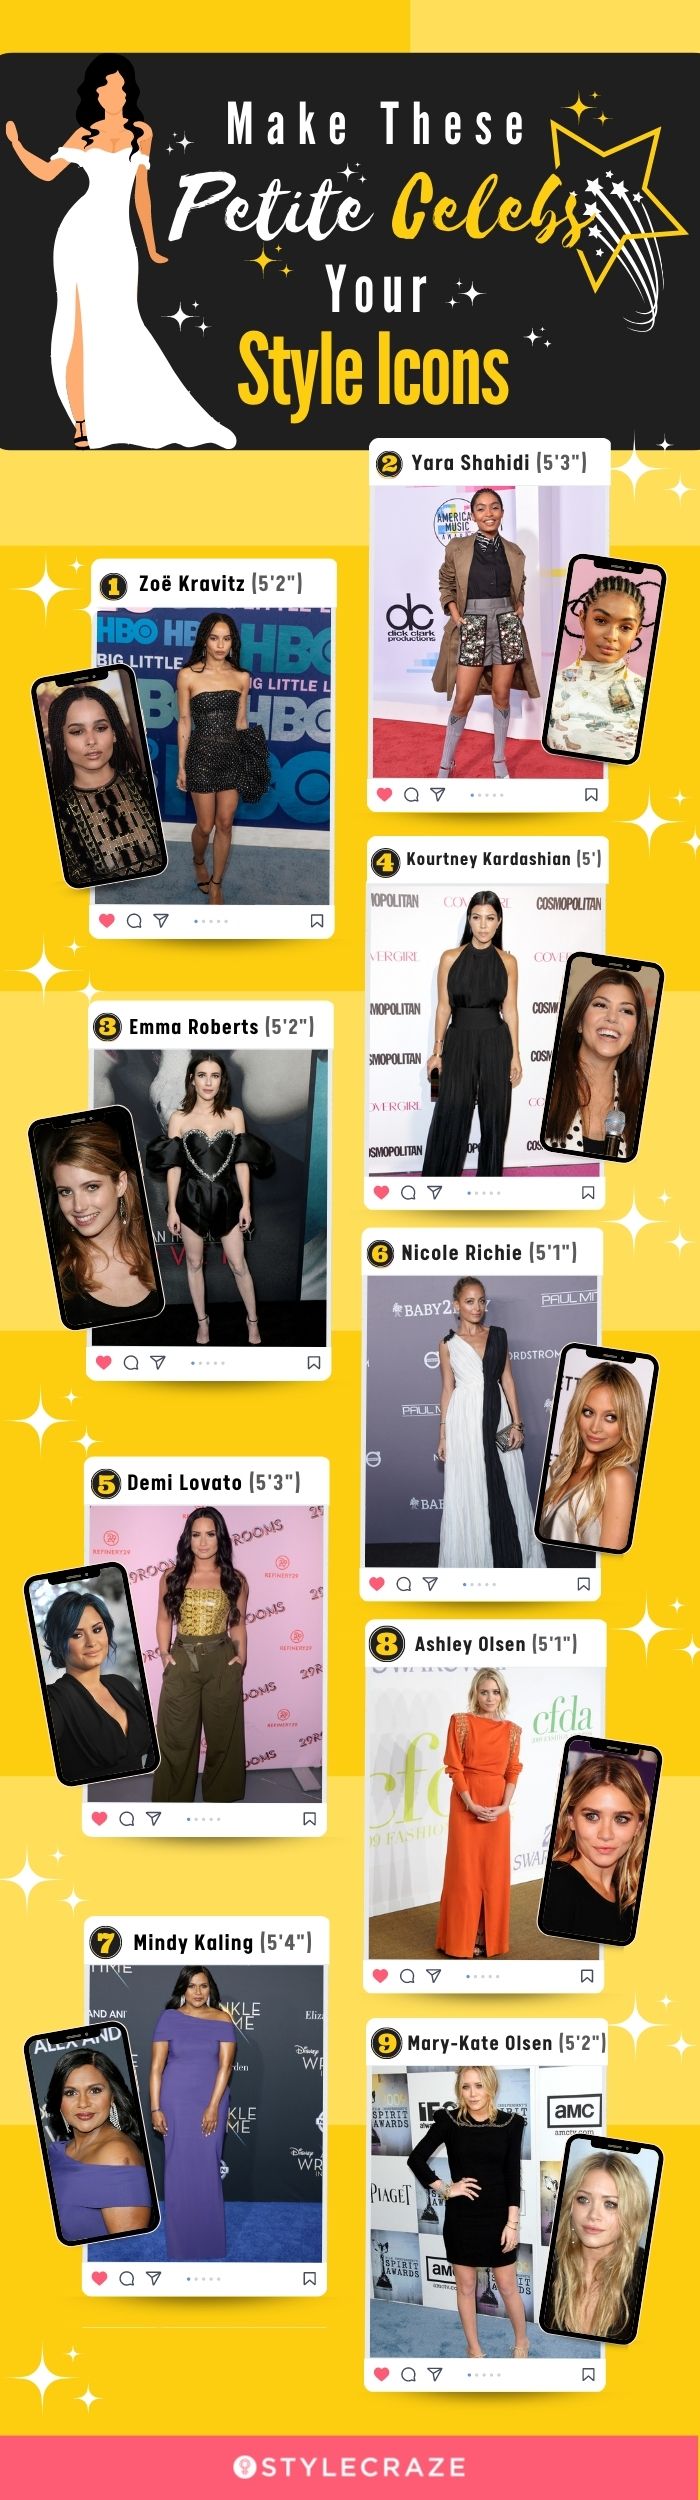 make these petite celebs your style icons (infographic)